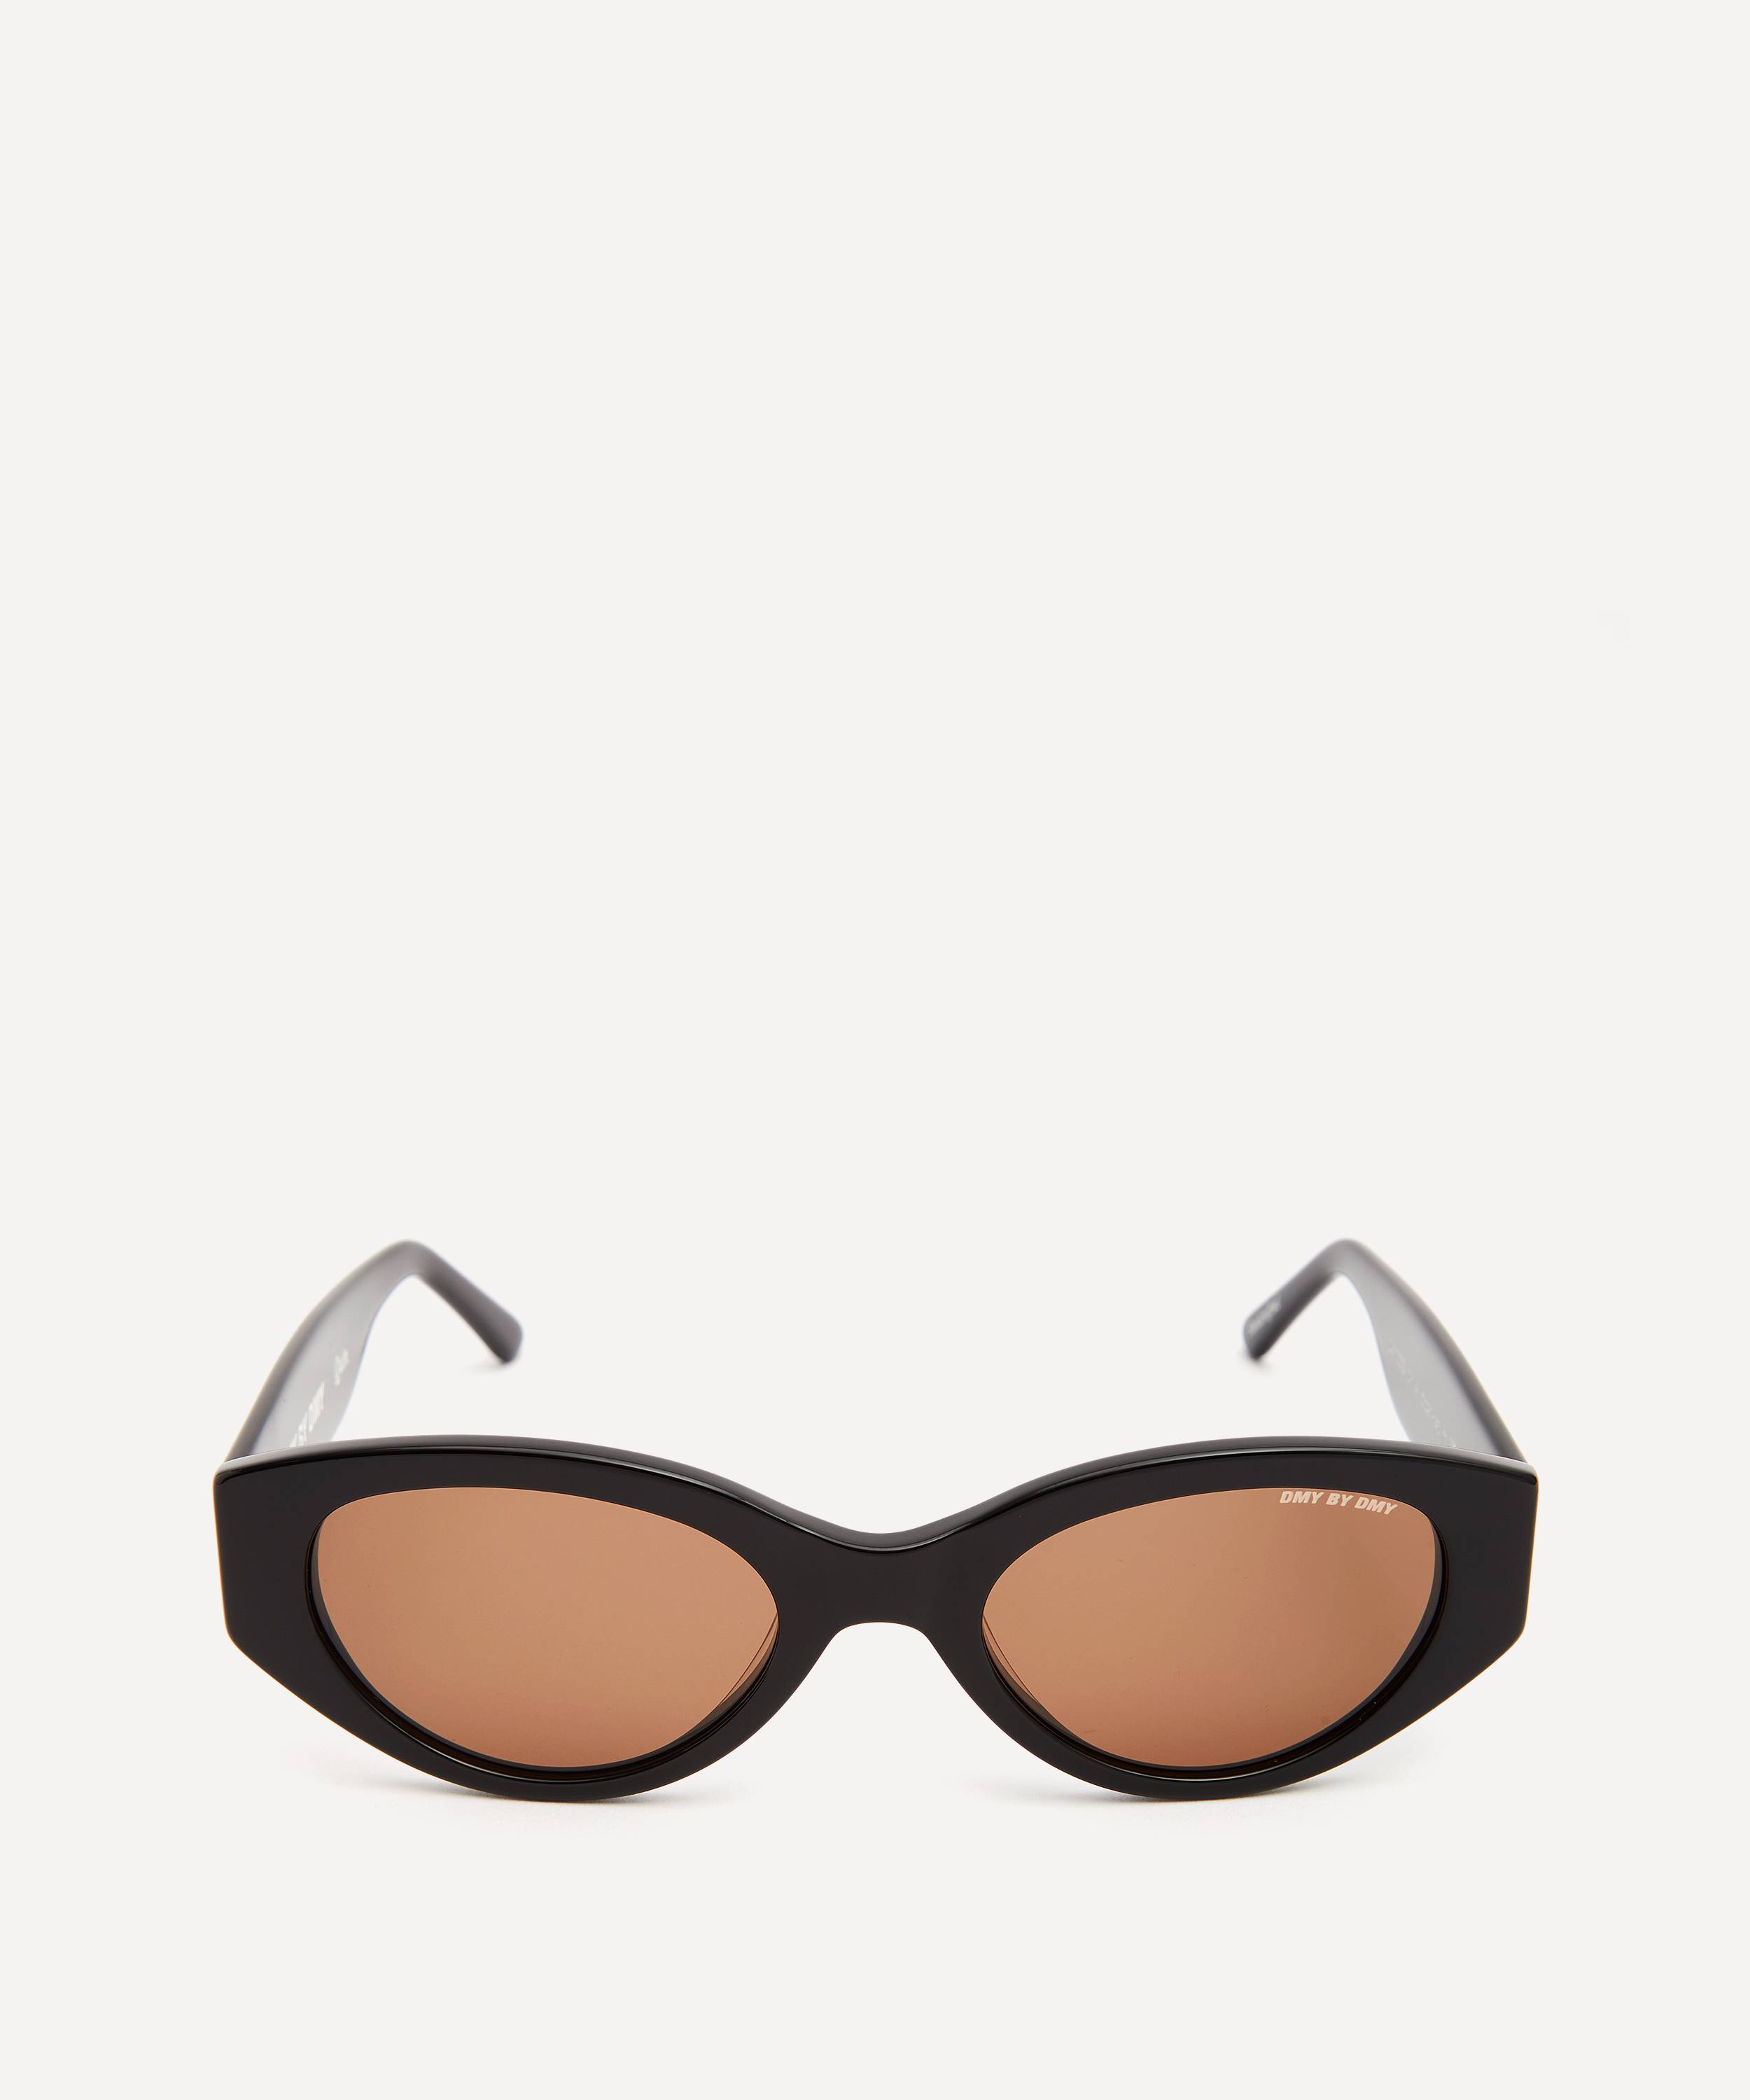 DMY BY DMY Quin Sunglasses | Liberty